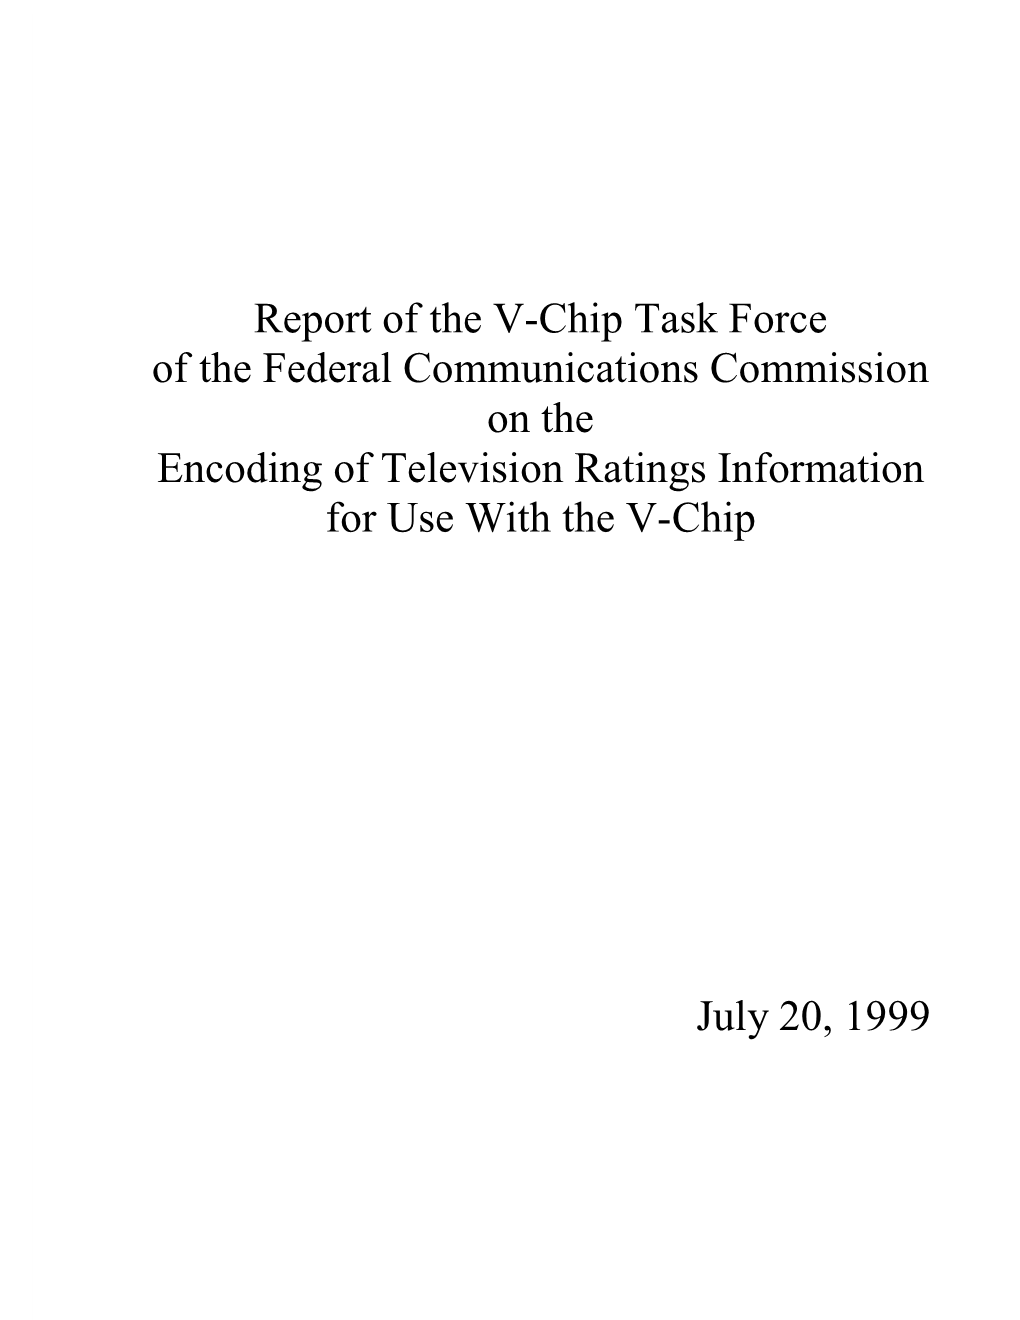 Report of the V-Chip Task Force of the Federal Communications Commission on the Encoding of Television Ratings Information for Use with the V-Chip